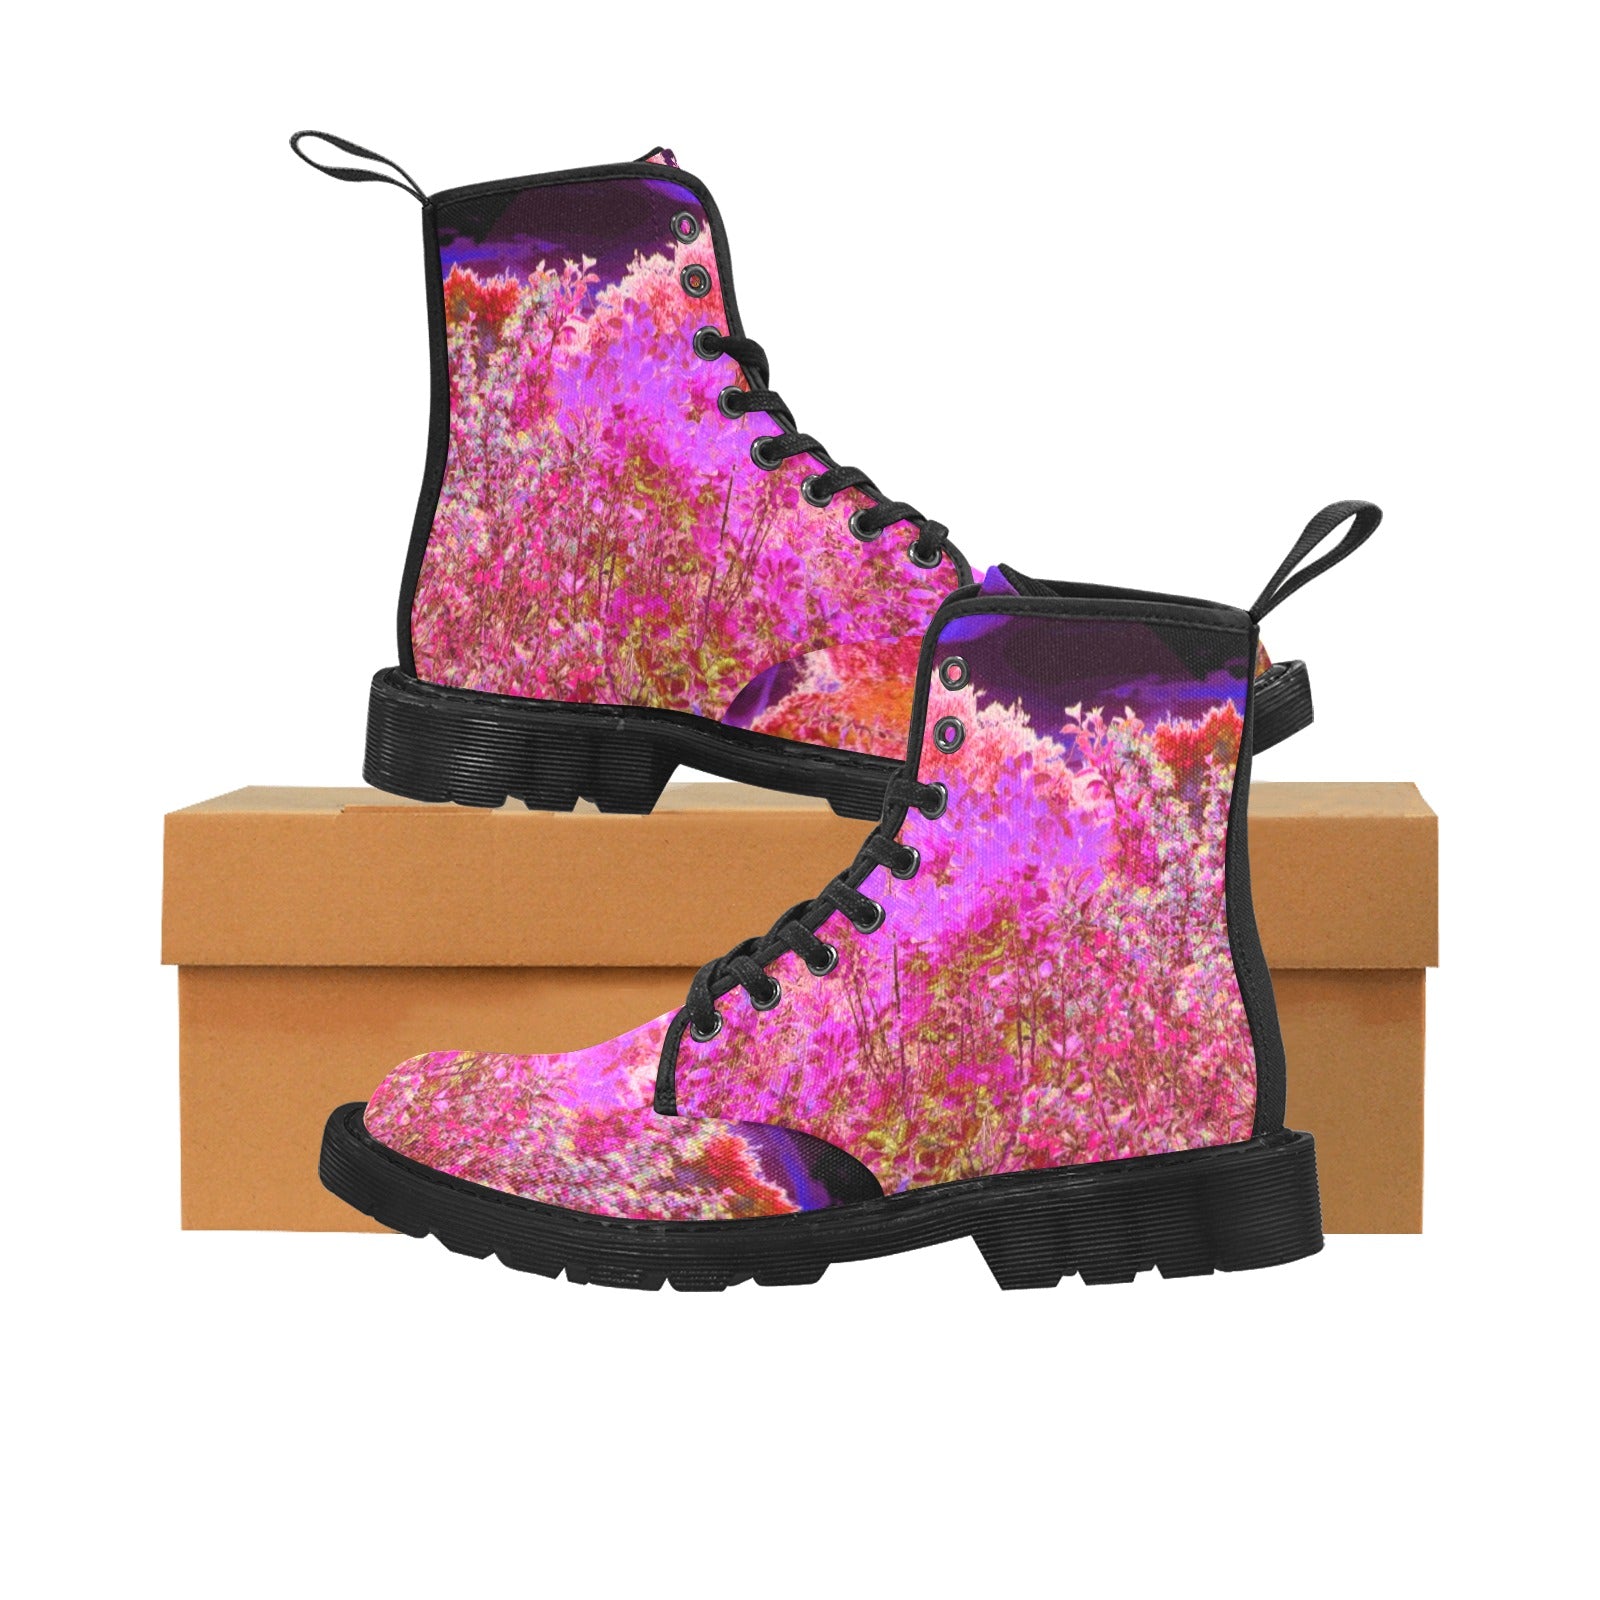 Boots for Women, Colorful Abstract Foliage Garden with Purple Sunset - Black